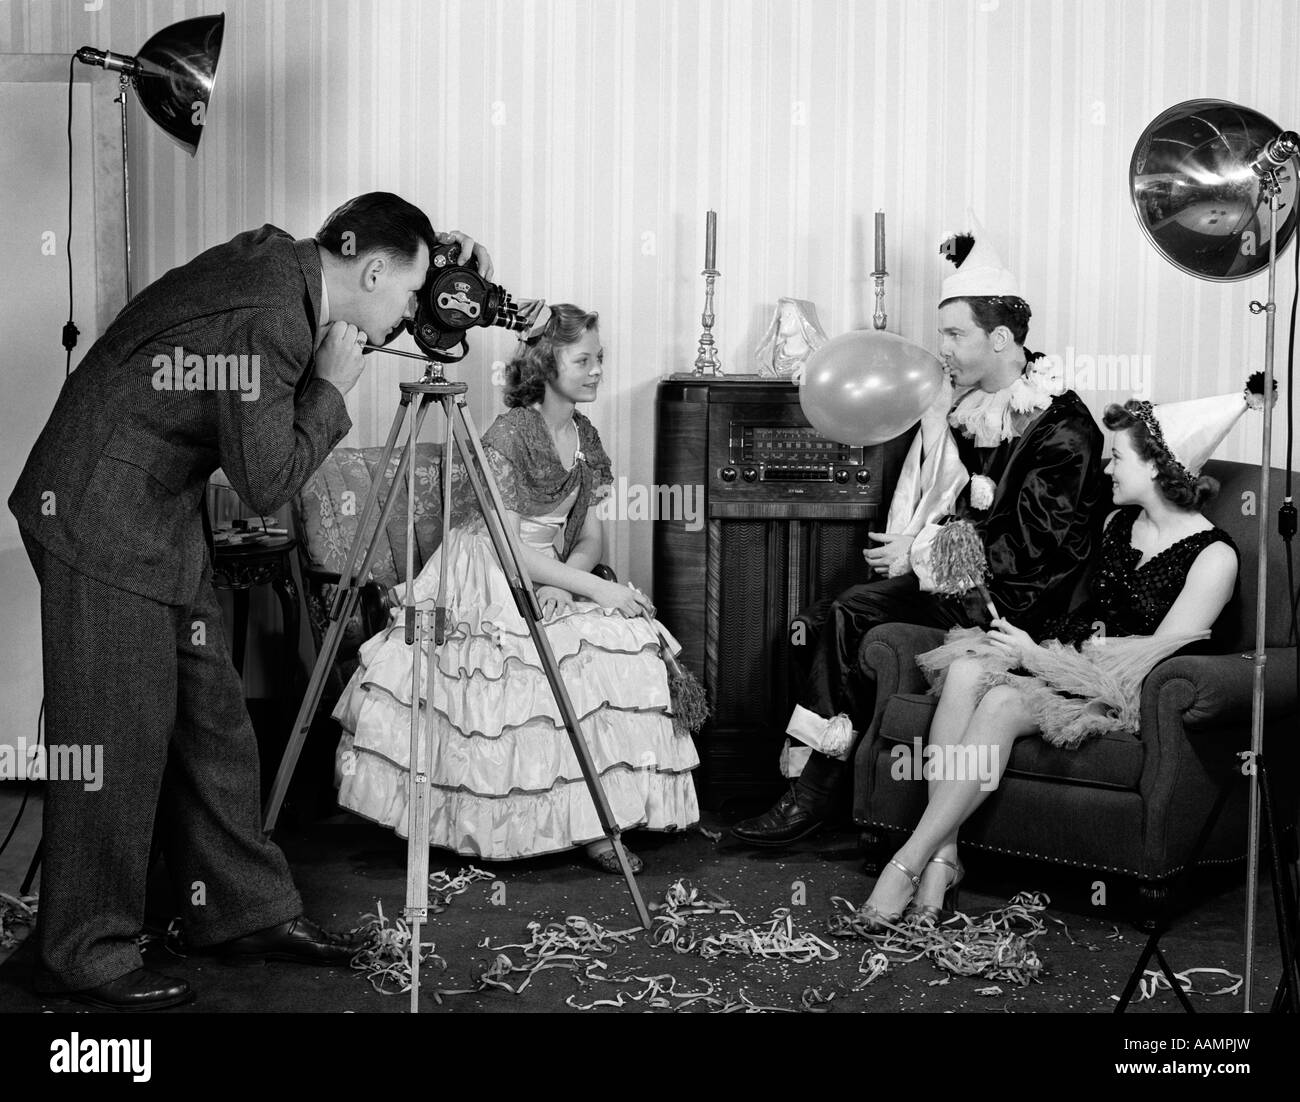 1940s PHOTOGRAPHER TAKING PICTURE OF TWO WOMEN & A MAN WEARING COSTUMES MAN BLOWING UP BALLOON Stock Photo